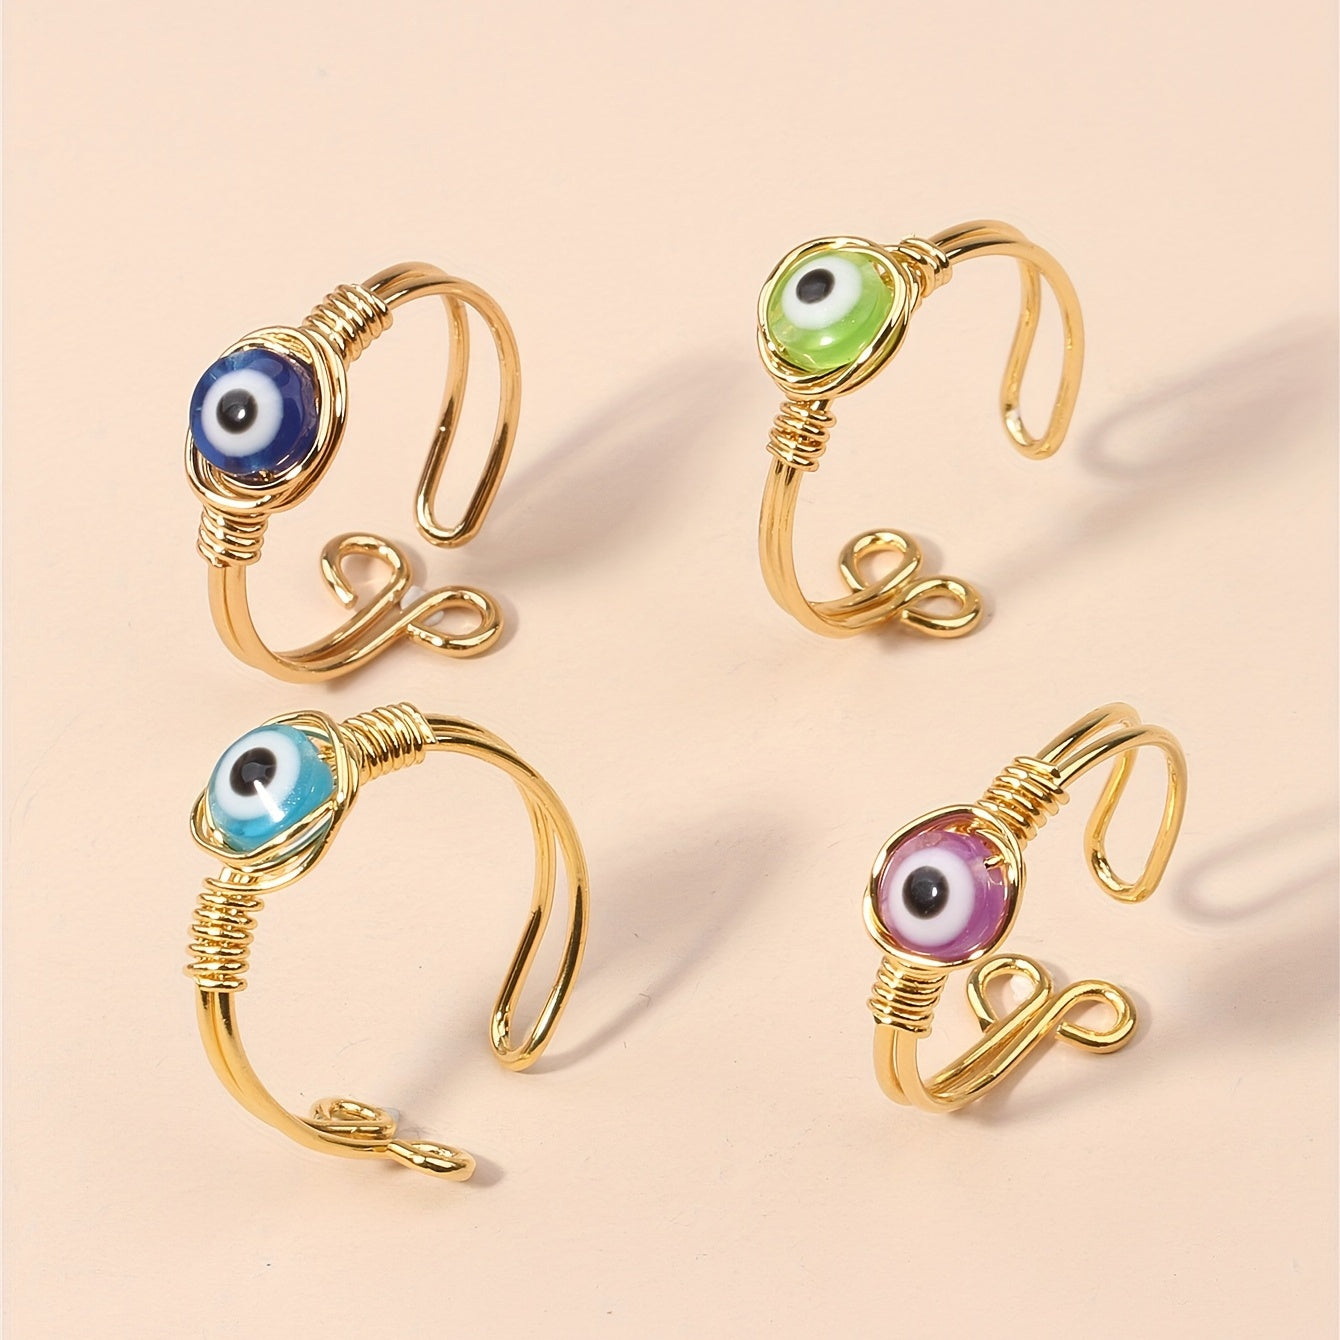 Evil Eye Shape Beads Open Ring Open Adjustable Rings Dainty Lucky Protection Jewelry Gifts